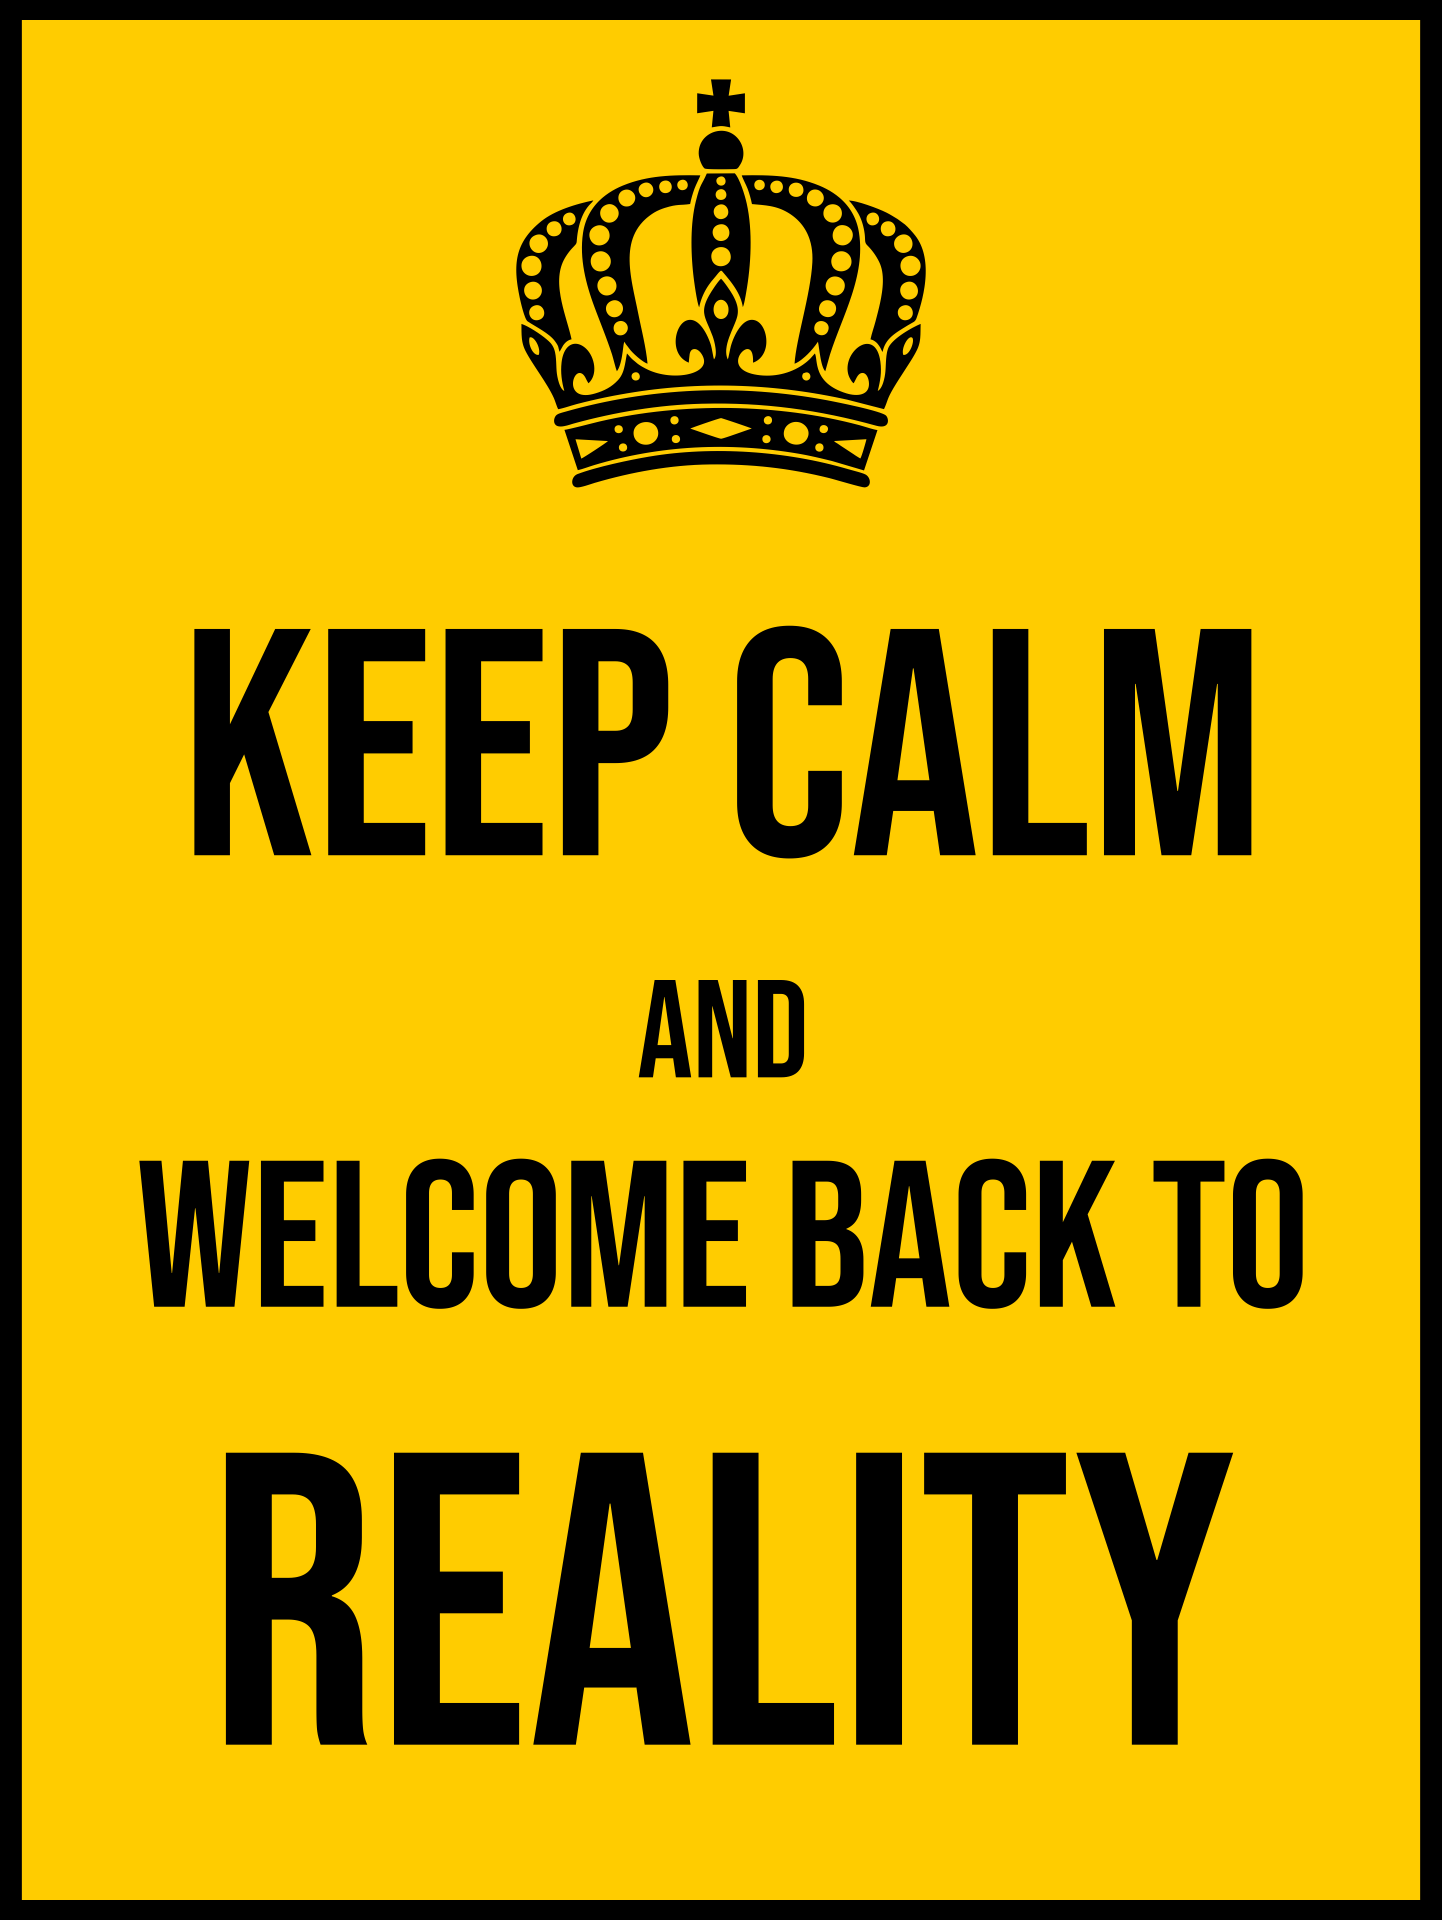 Keep Calm and Welcome Back to Reality